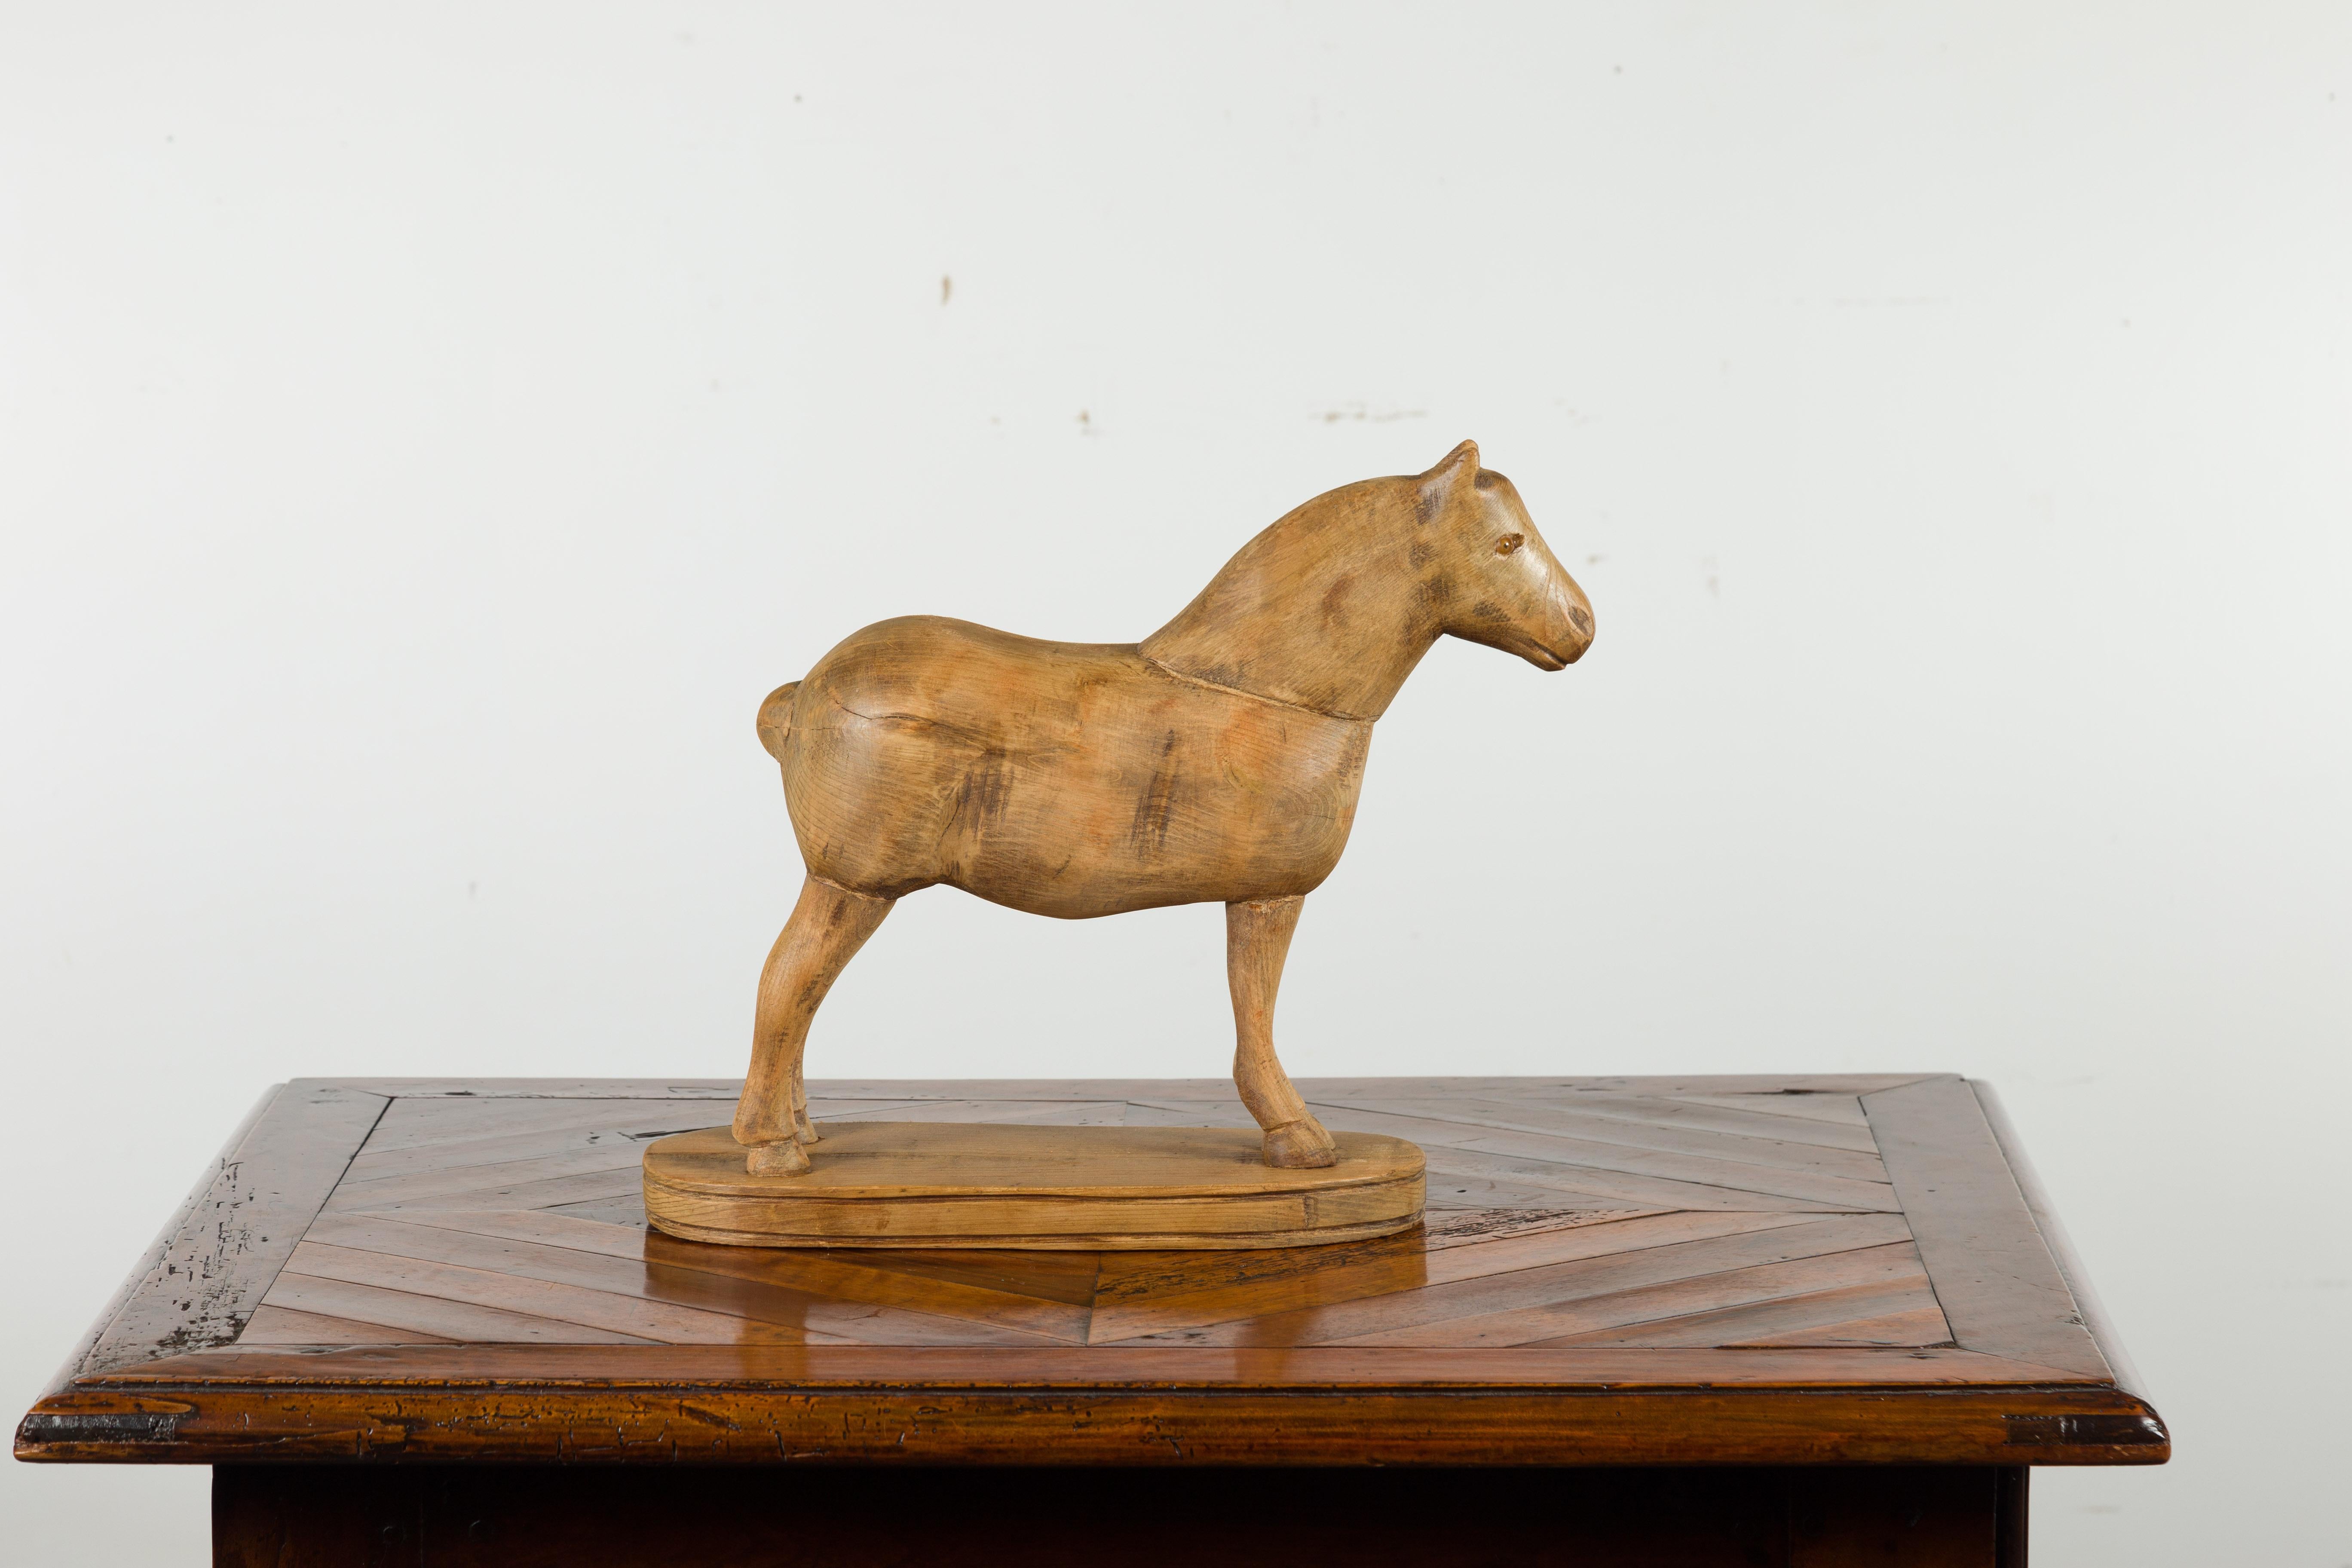 A small English carved pine horse from the early 20th century on oval base. Carved in England during the early years of the 20th century, this small pine horse charms us with its petite proportions and archaic style. Standing proudly on an oval